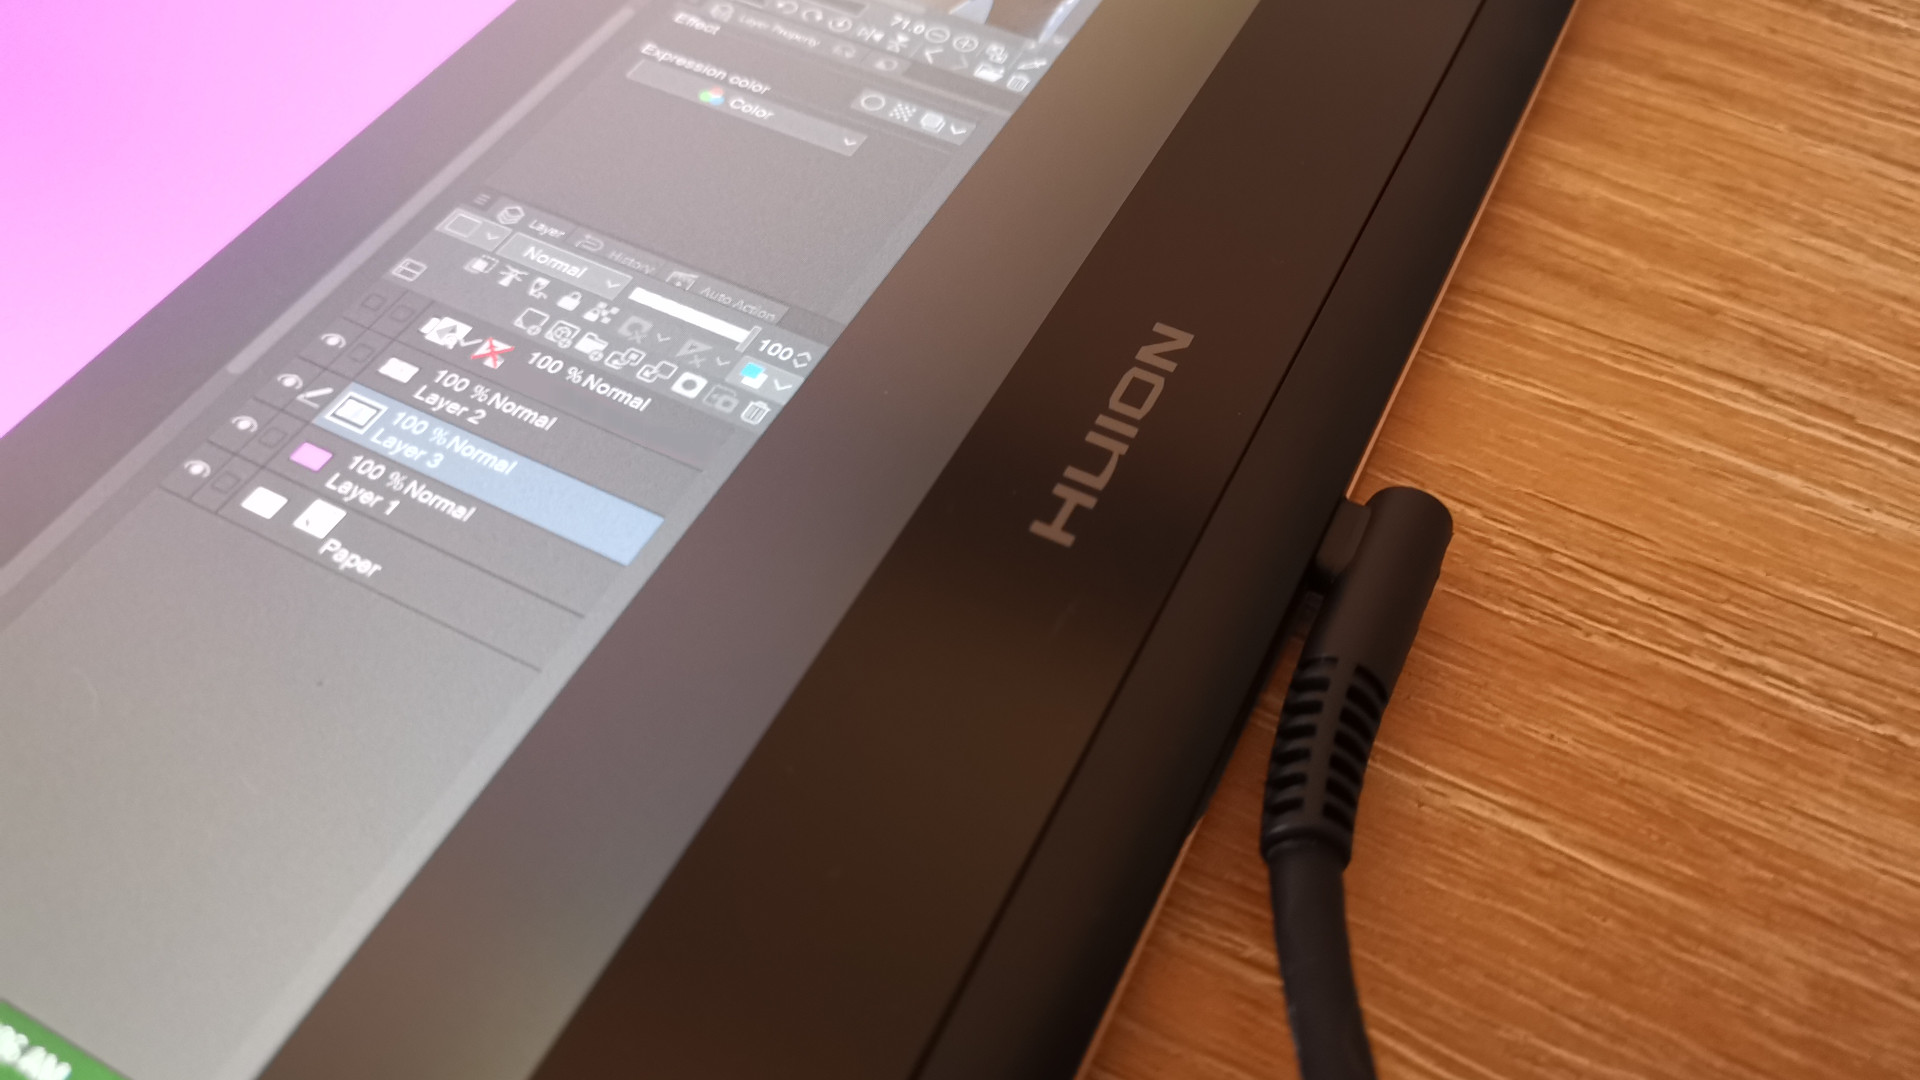 The logo displayed on the side of the Huion Kamvas Pro 16